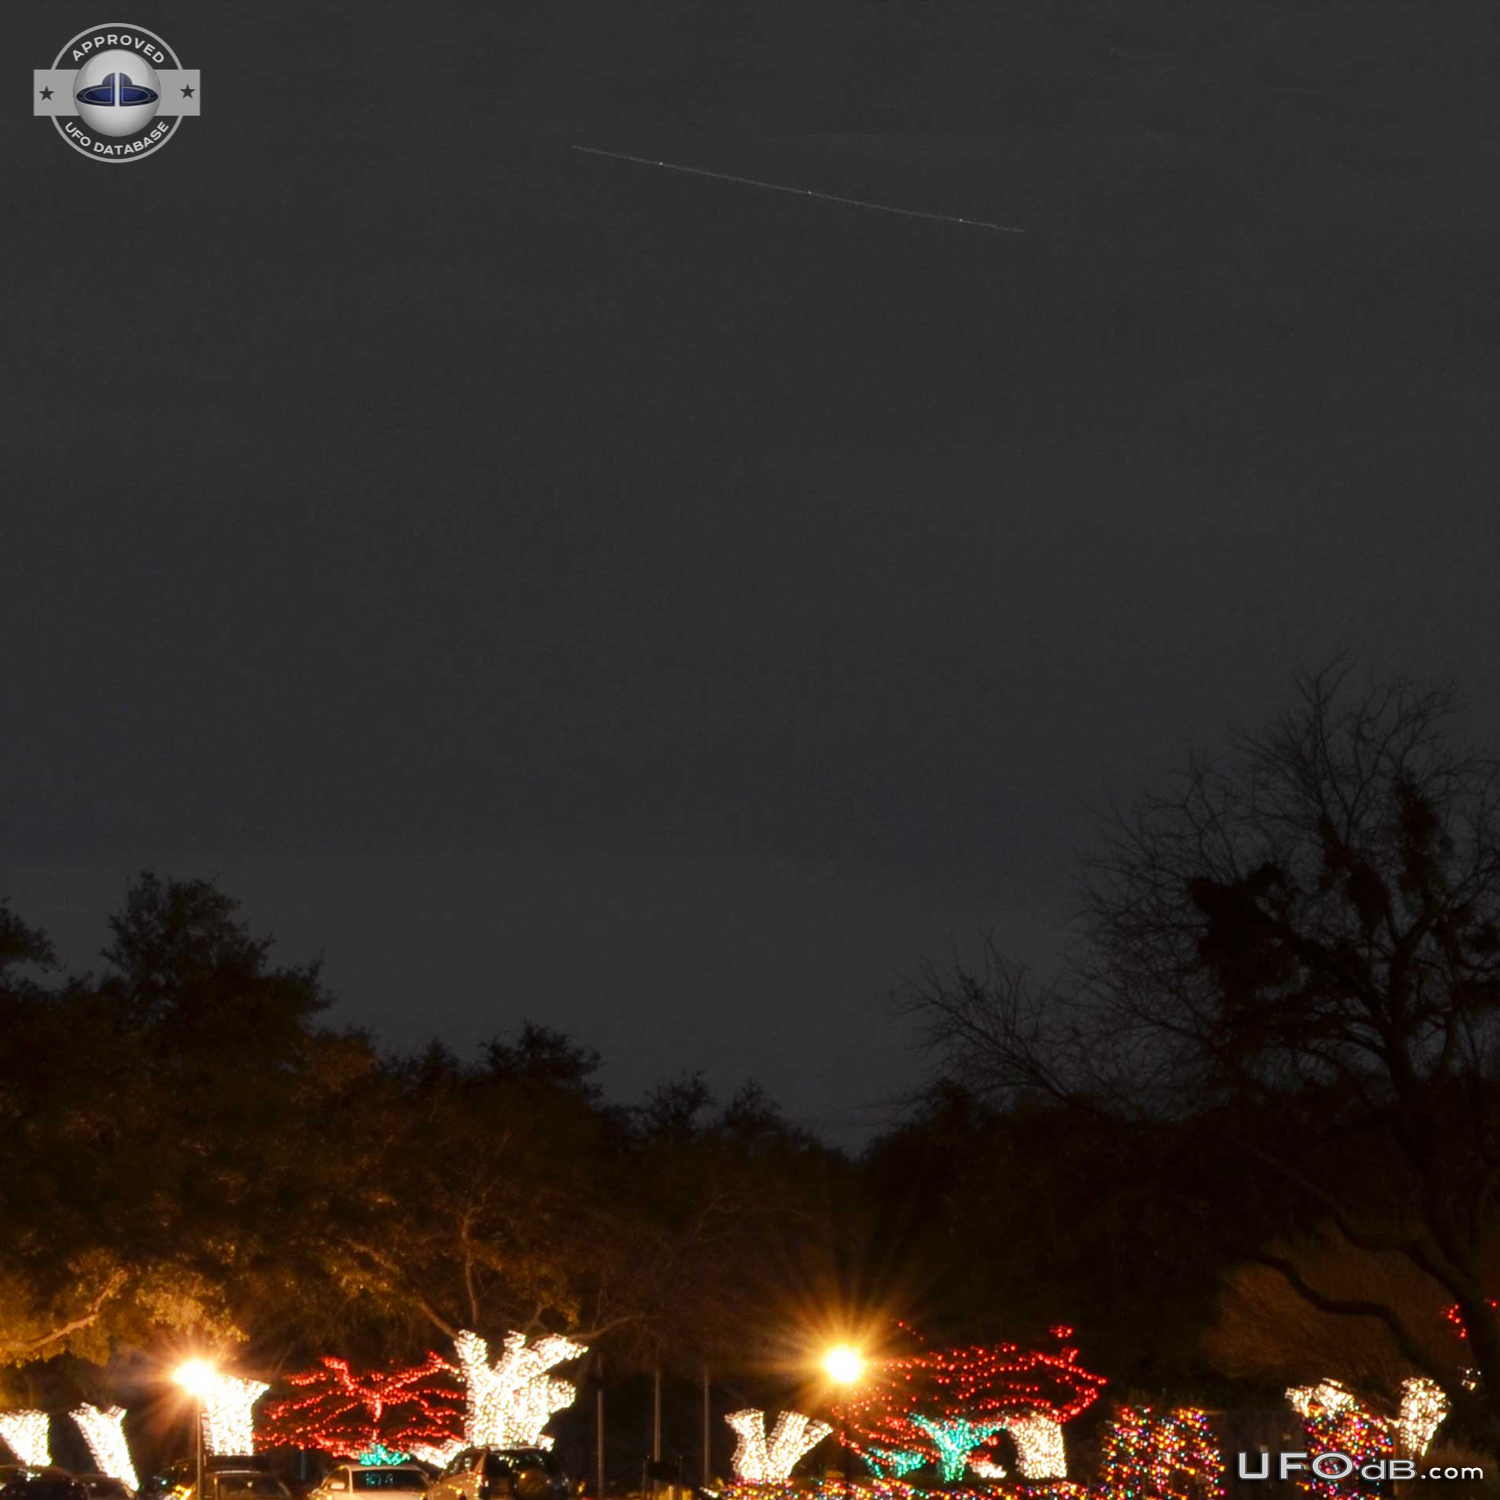 UFOs are showing on 2011 Christmas pictures - Dallas, Texas - 2011 UFO Picture #390-1